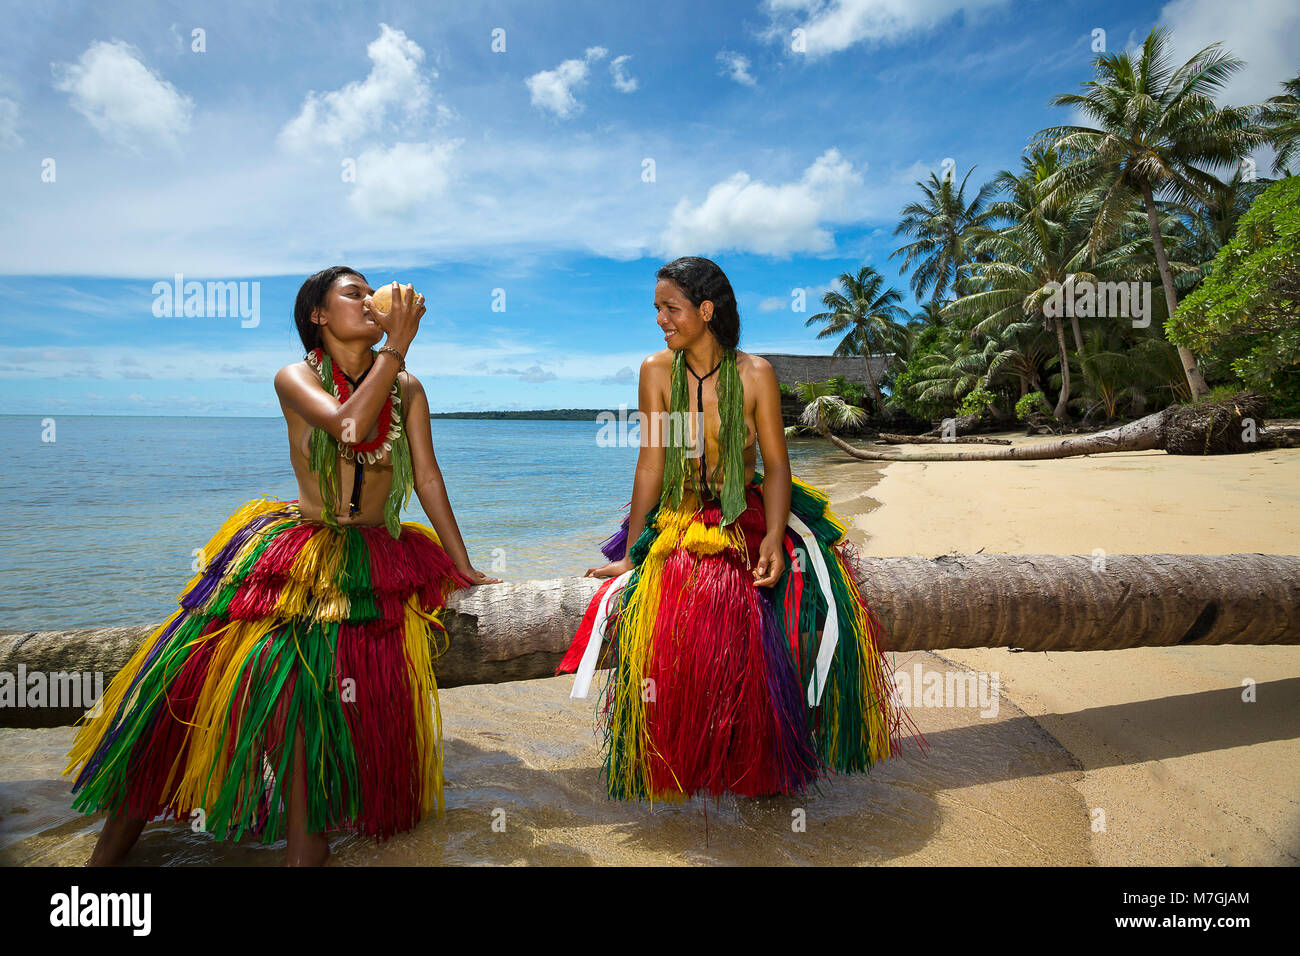 These two young girls (MR) are in traditional outfits for cultural cerimonies on the island of Yap, Micronesia. Stock Photo